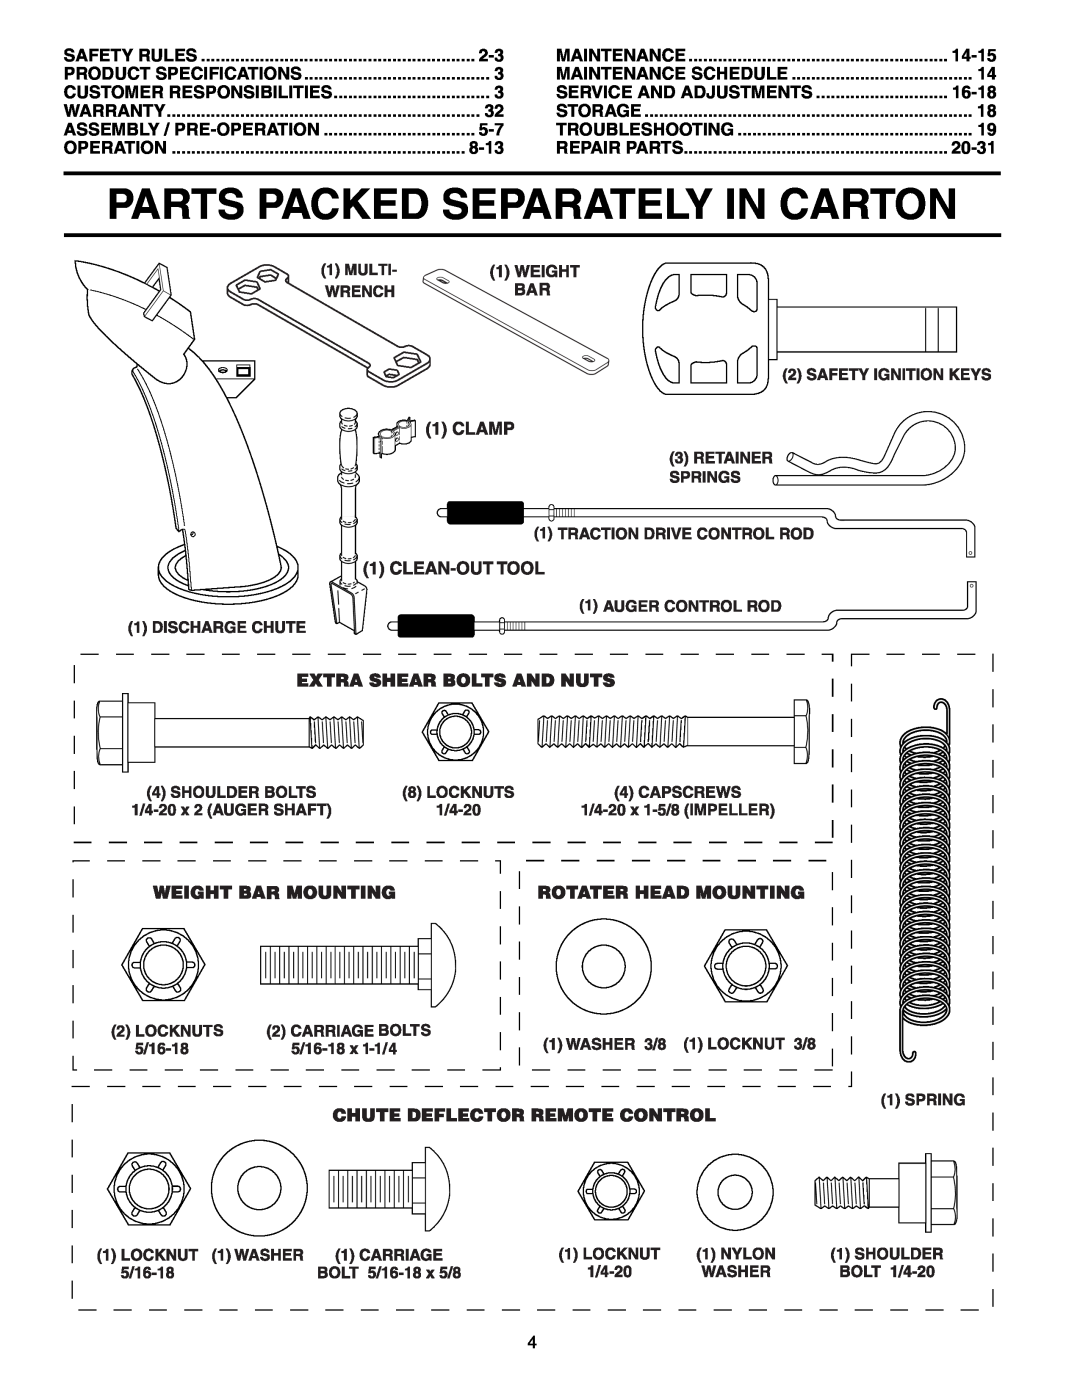 Poulan 192046 owner manual Parts Packed Separately In Carton, 8-13, 14-15, Service And Adjustments, 16-18, 20-31 